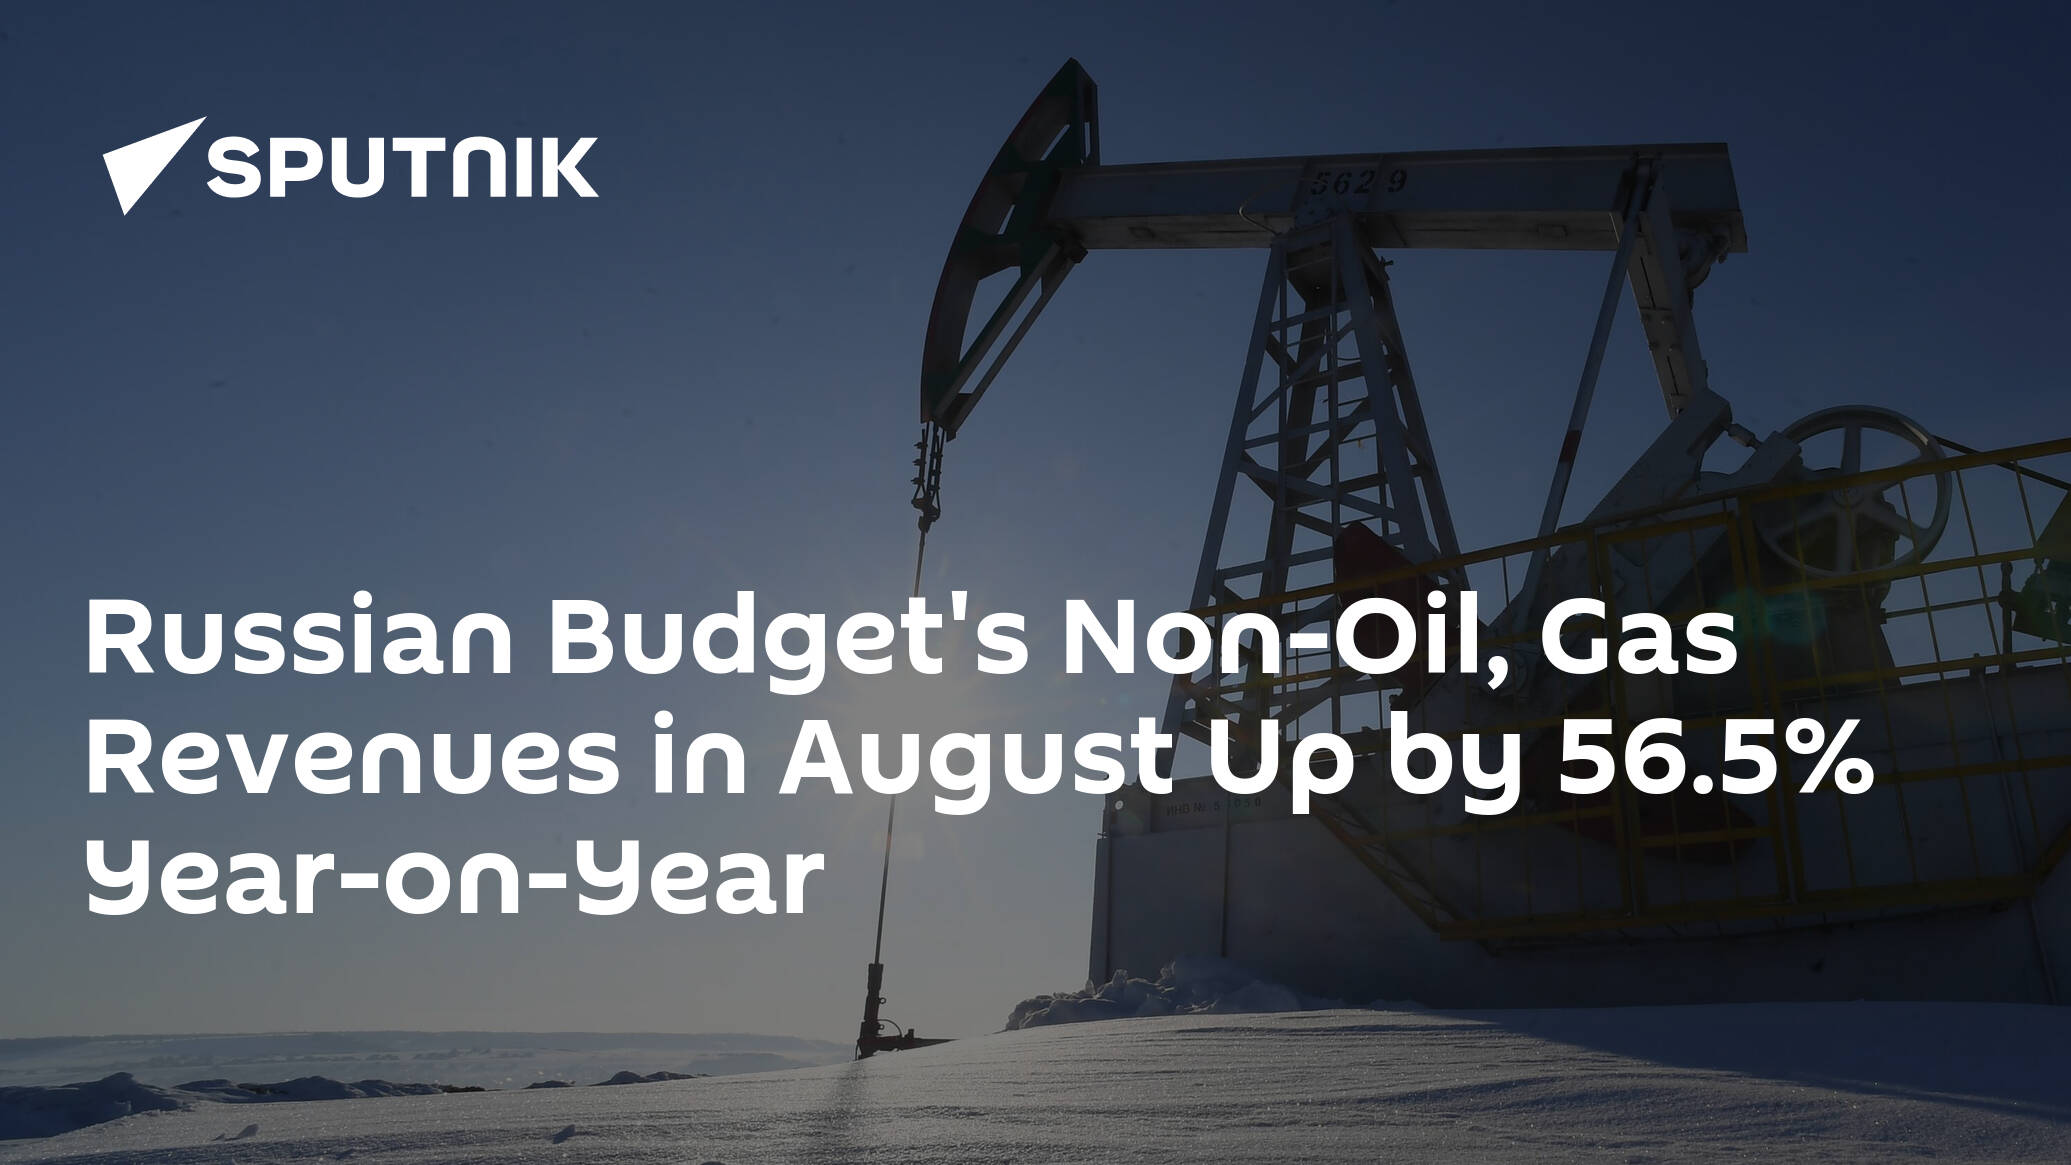 Russian Budget's Non-Oil, Gas Revenues in August Up by 56.5% Year-on-Year